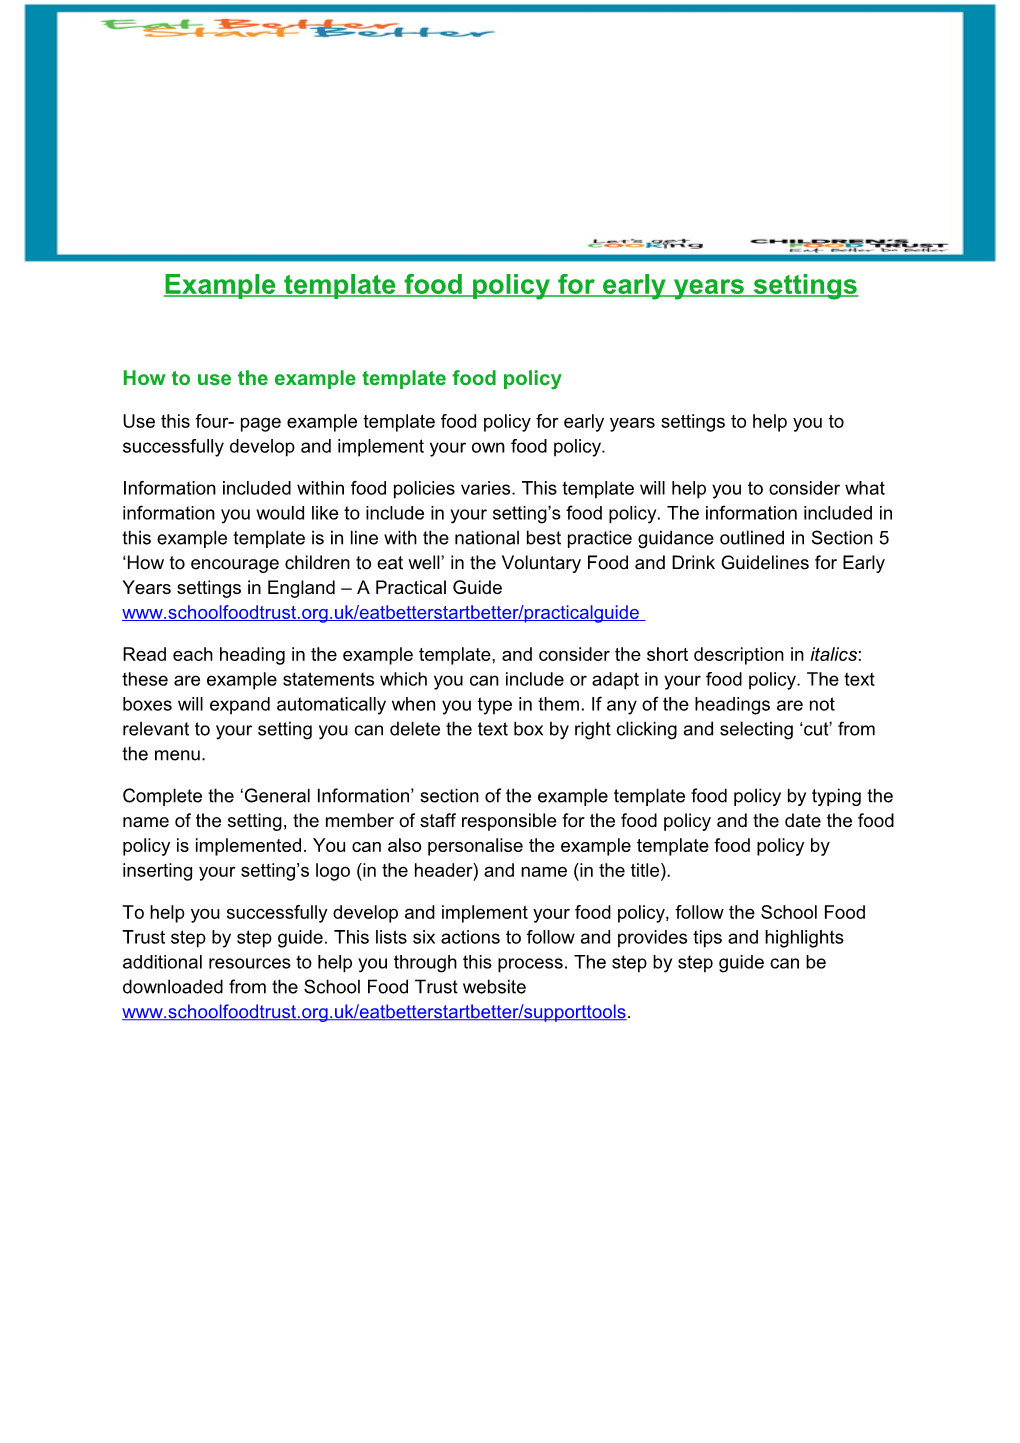 Example Template Food Policy for Early Years Settings